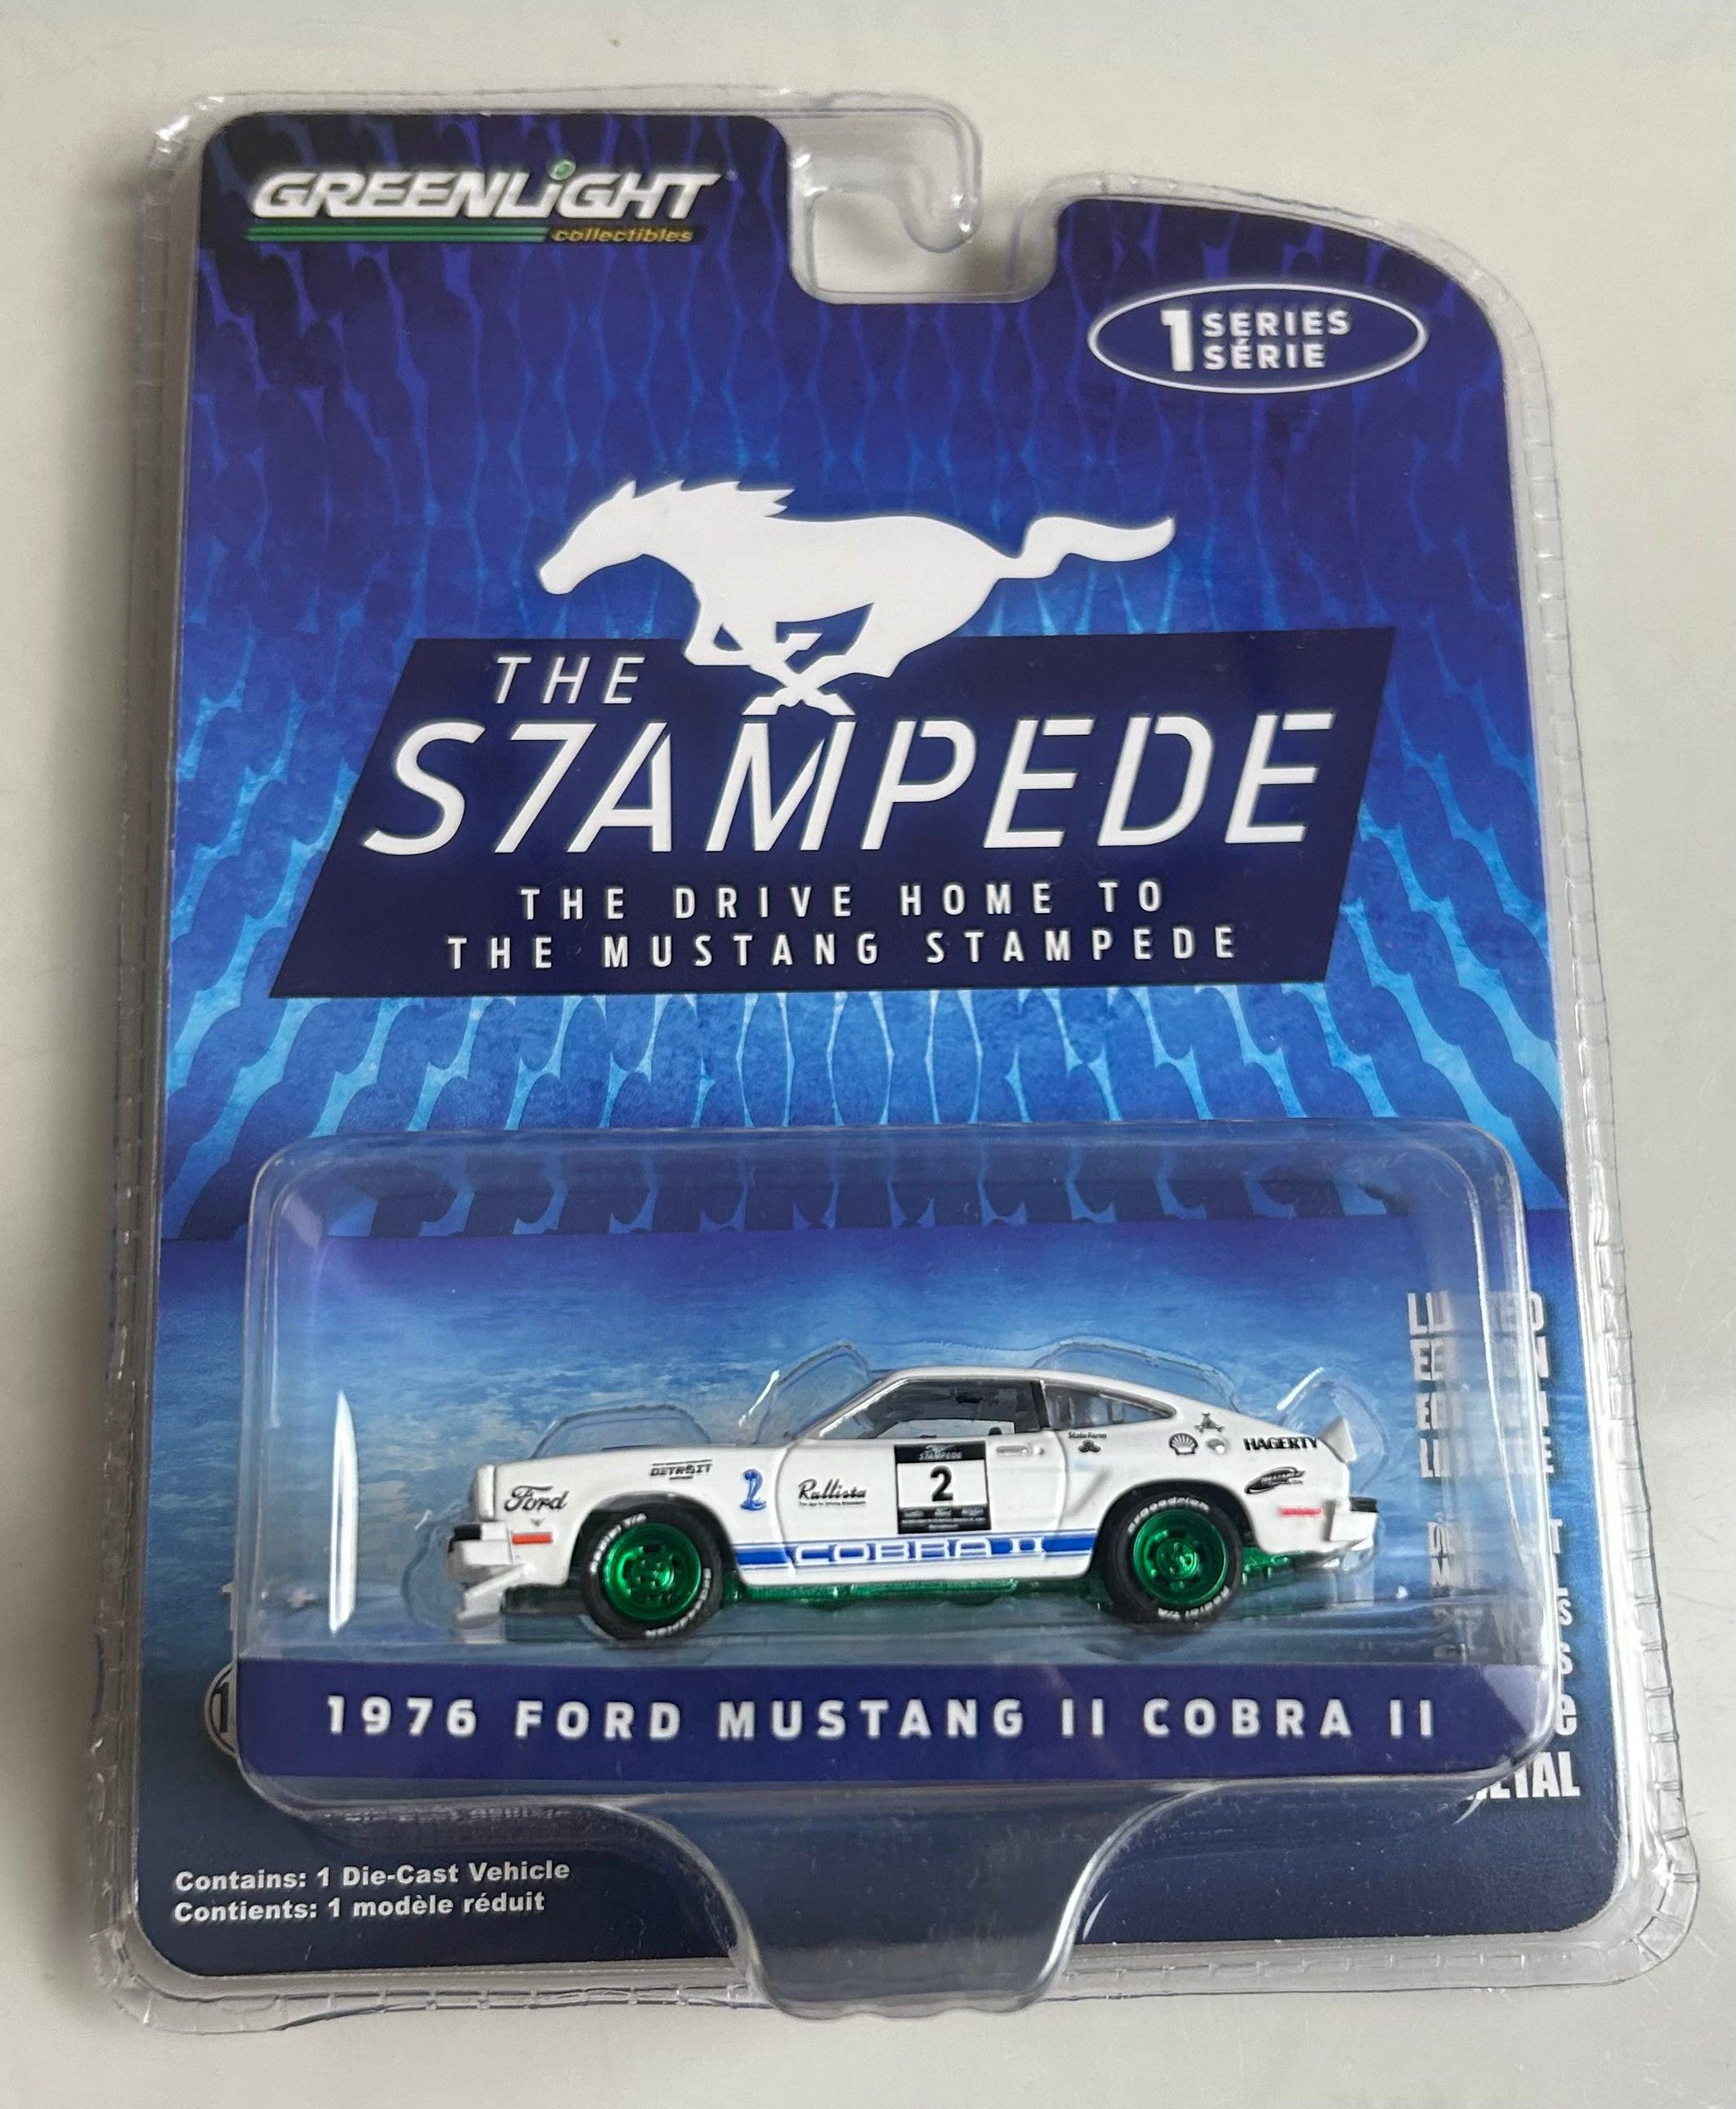 1/64 1976 FORD MUSTANG II COBRA II - THE STAMPEDE  "CHASE" (GREEN RIMS VARIATION)